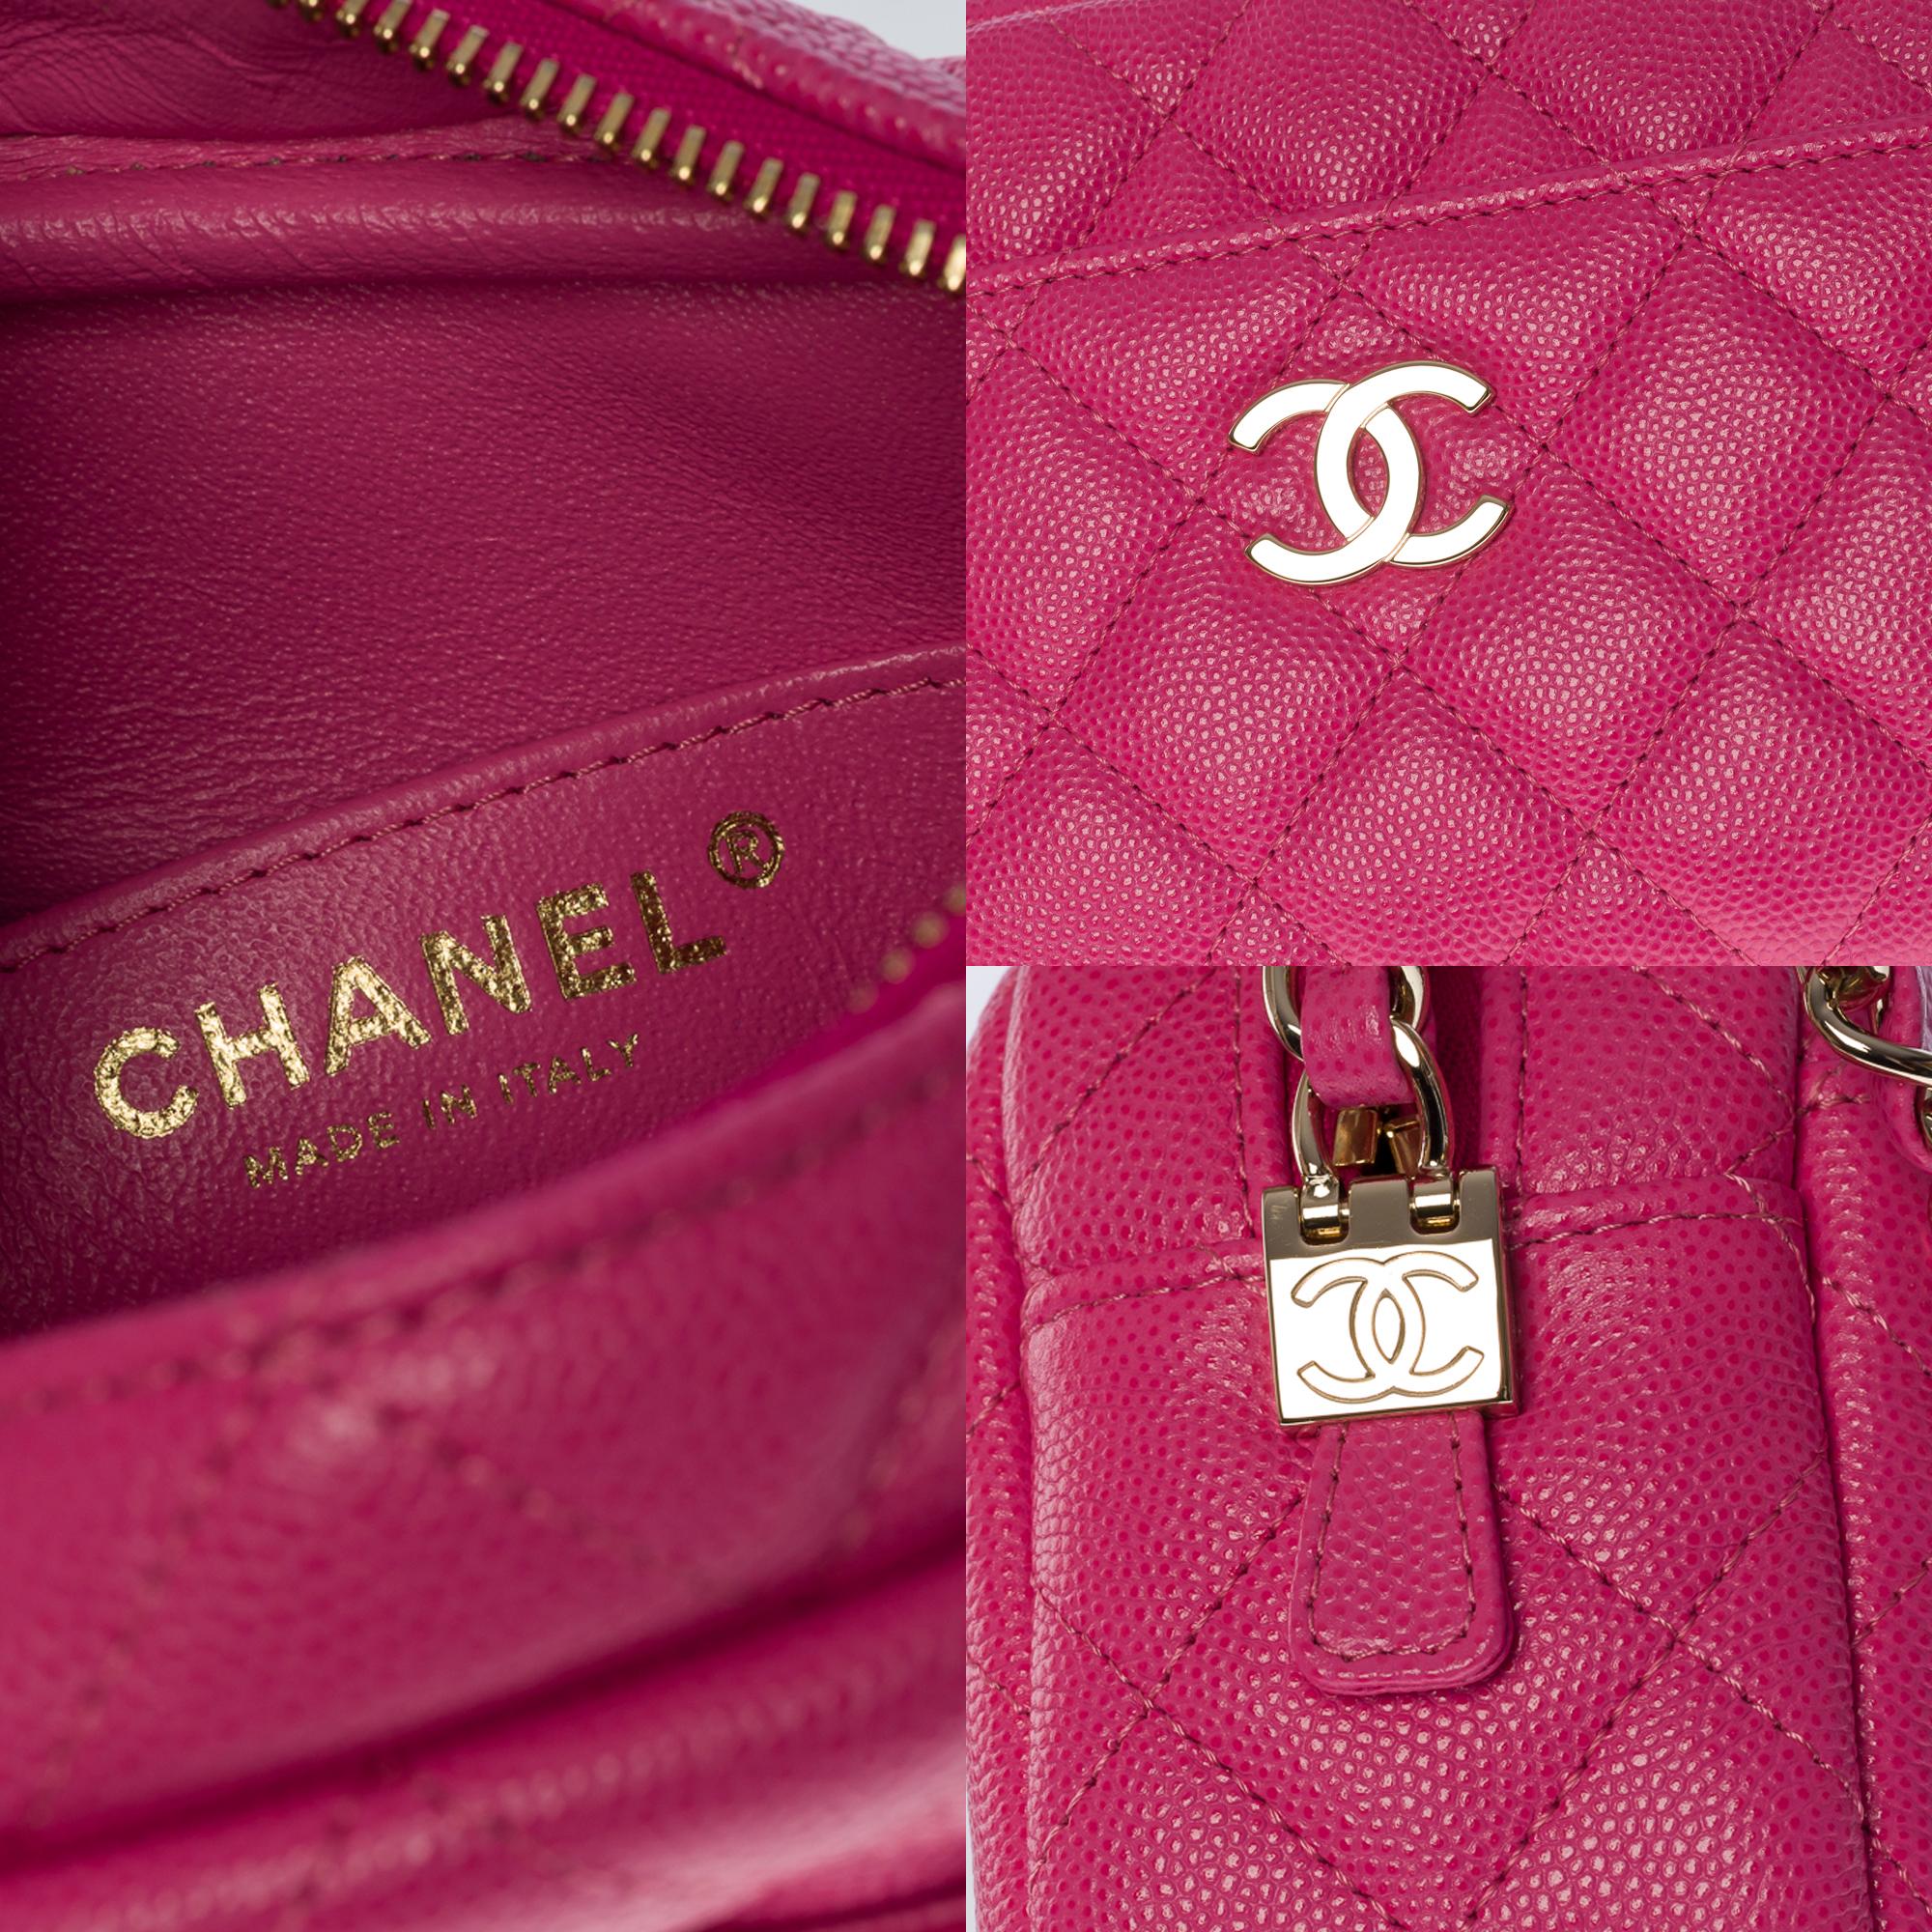 New- Amazing Chanel Mini Camera shoulder bag in Pink caviar leather, CHW 1